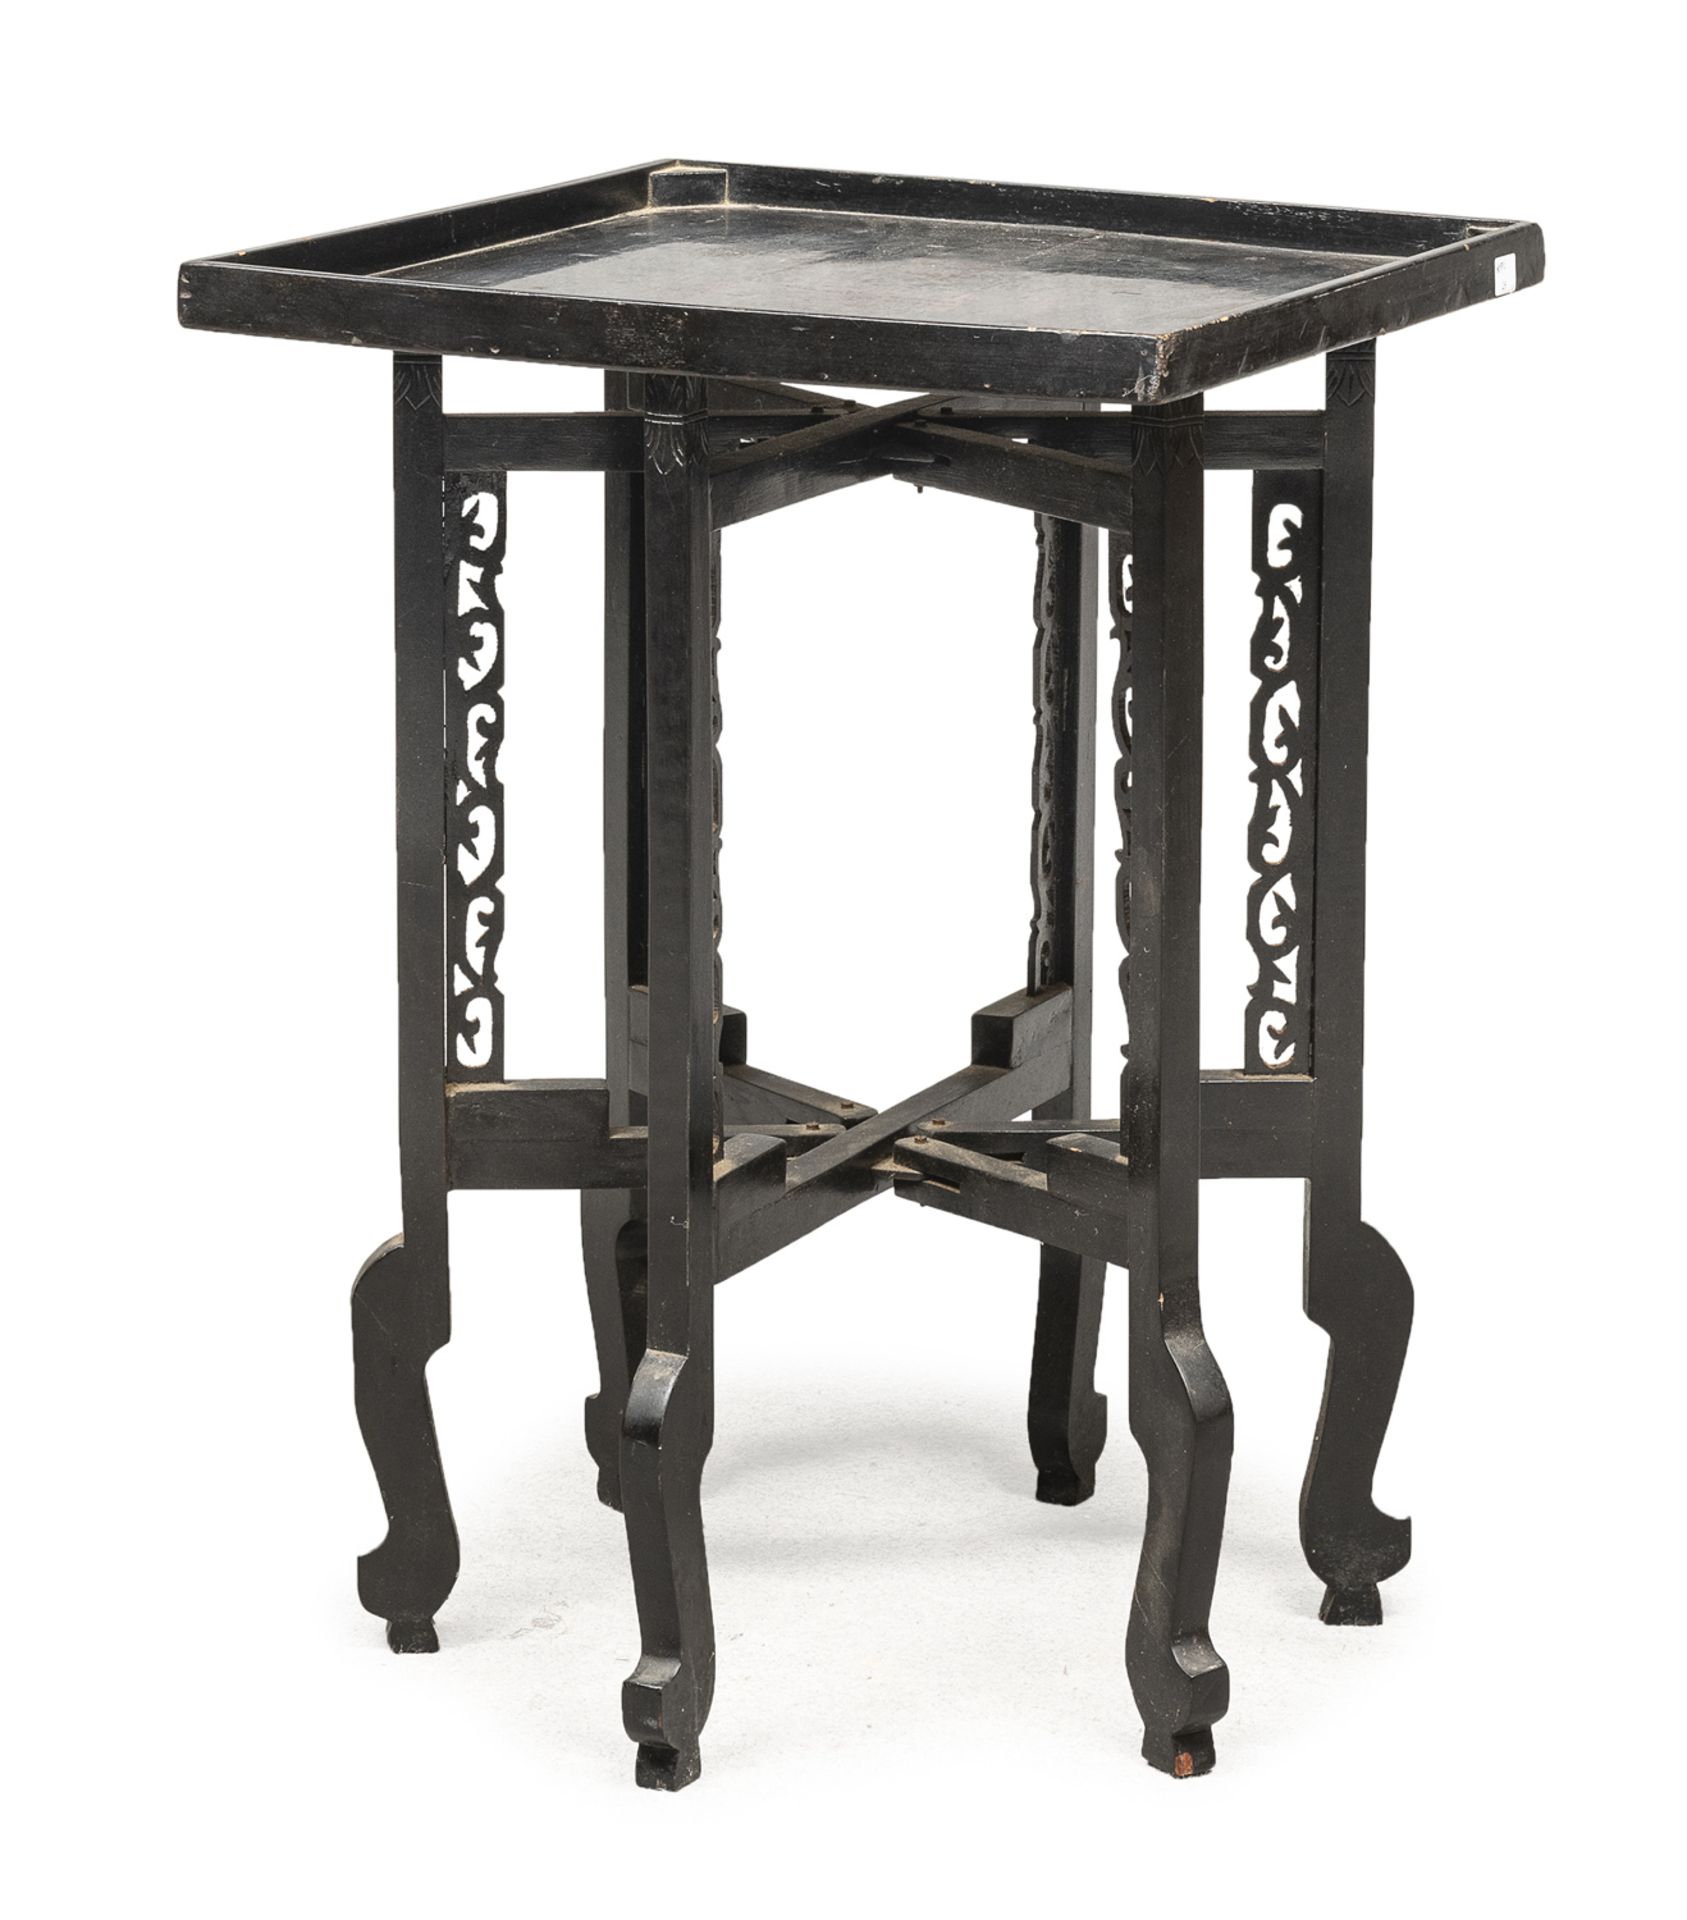 A CHINESE BLACK LACQUER WOOD TABLE 20TH CENTURY.